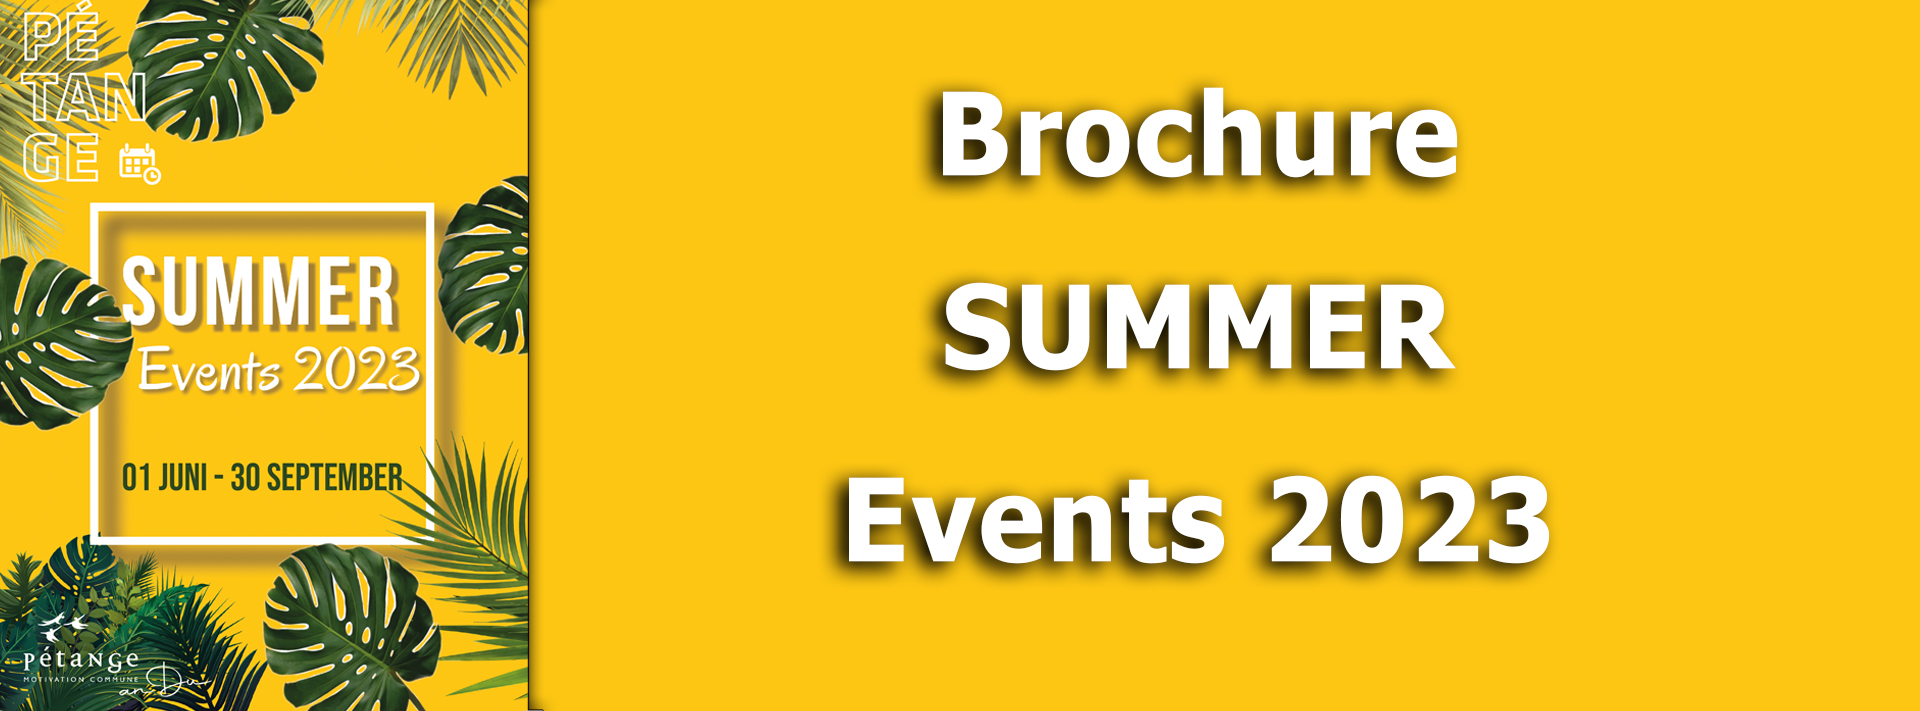 Summer Events 2023